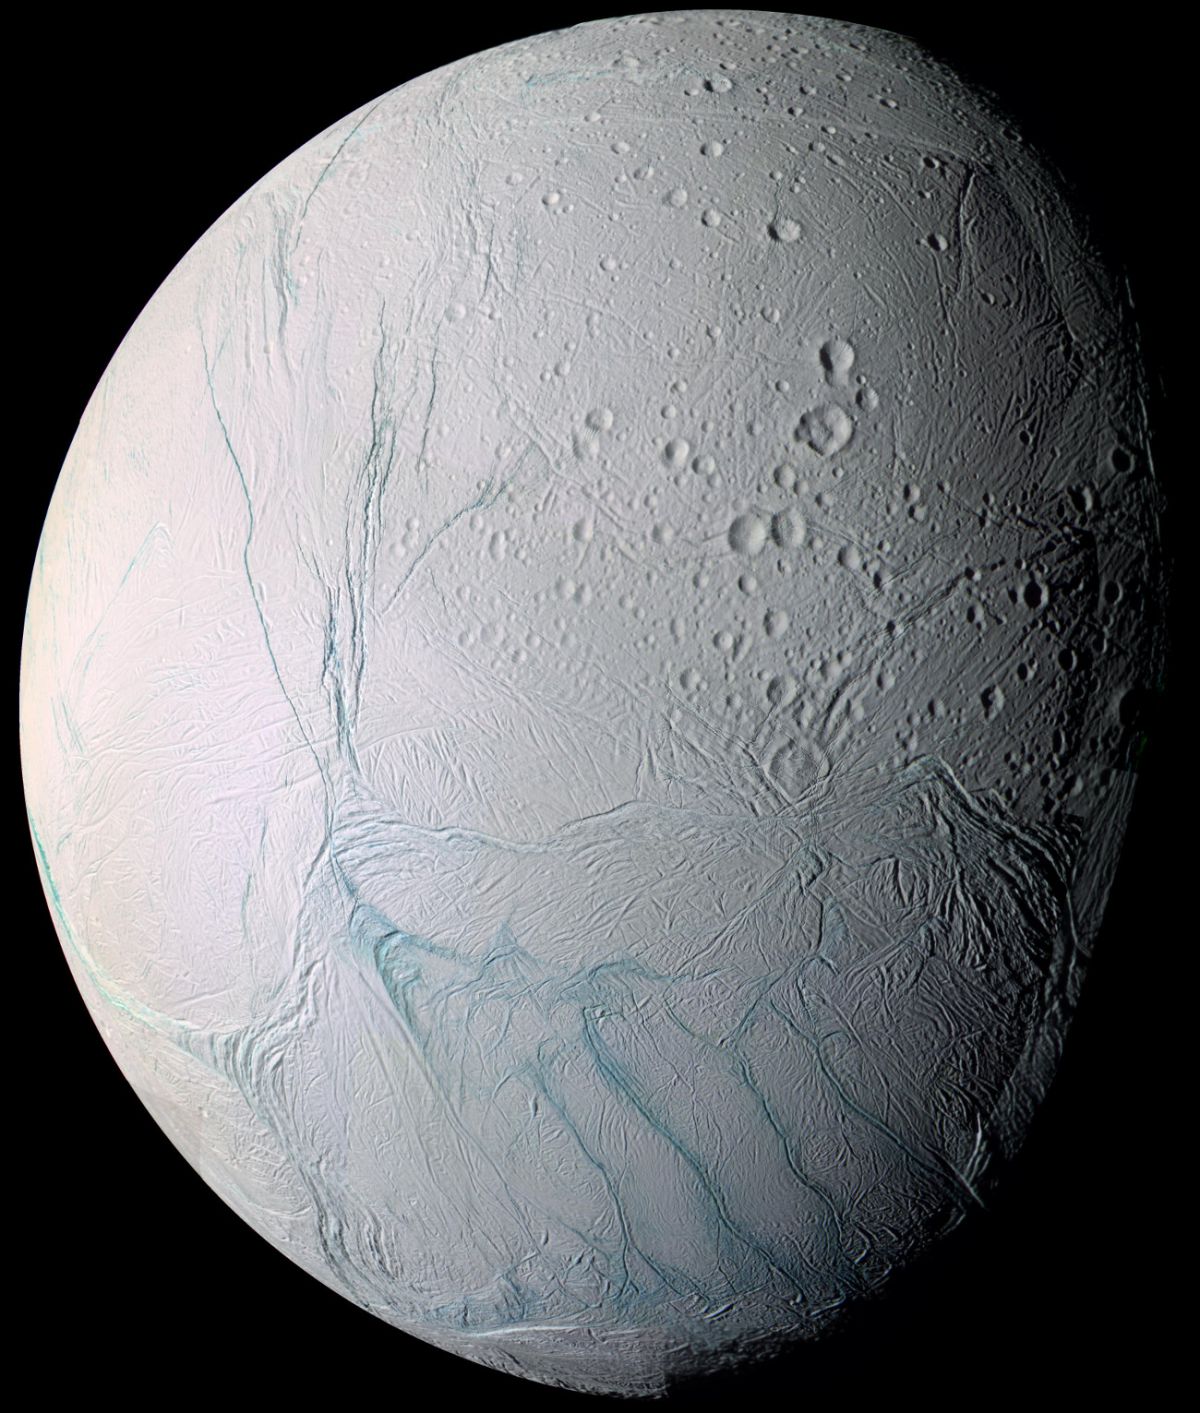 Enceladus craters and complex fractured terrains